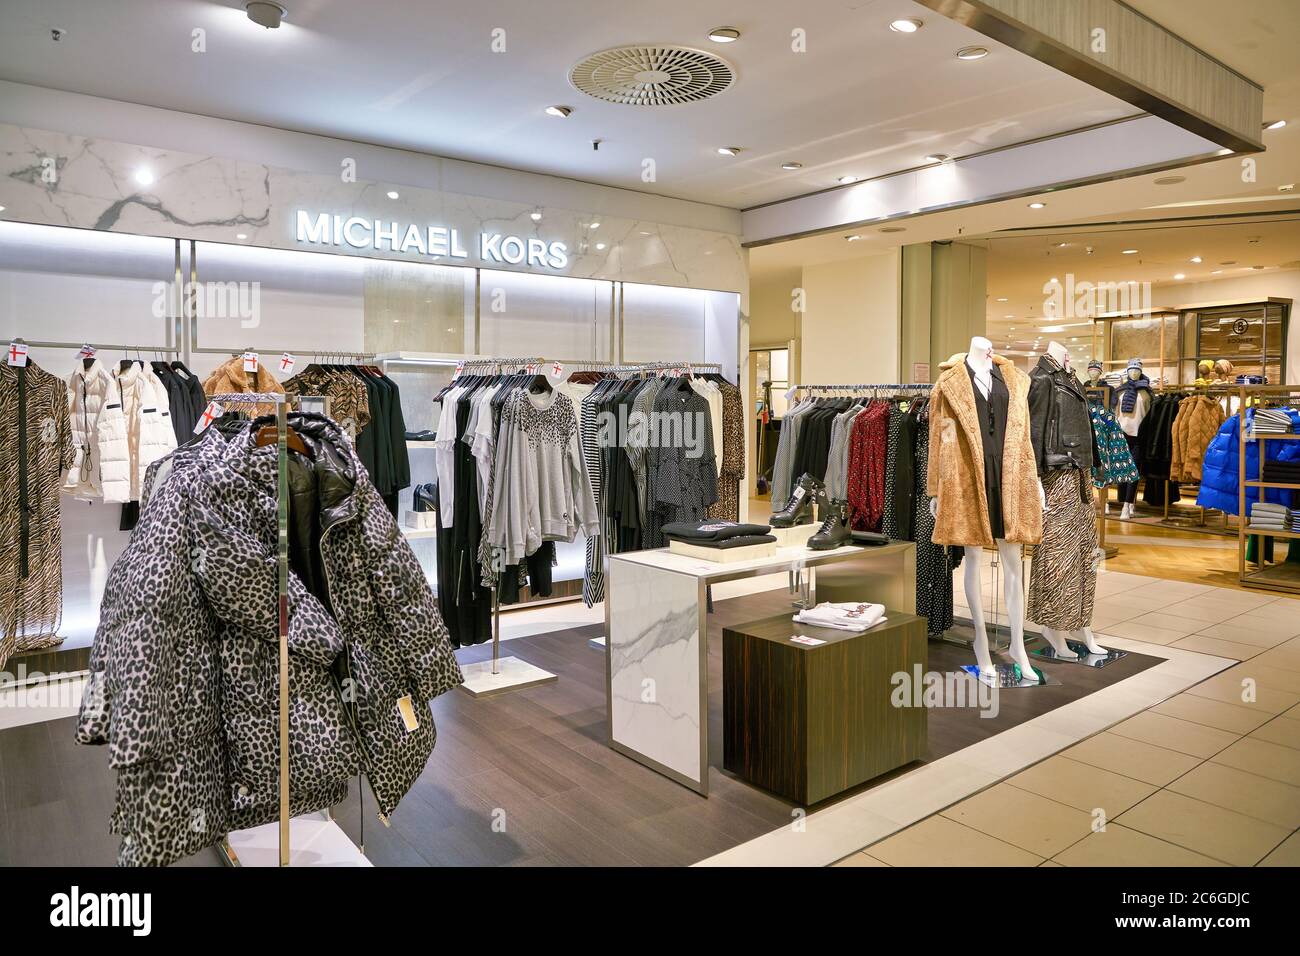 michael kors clothing outlet